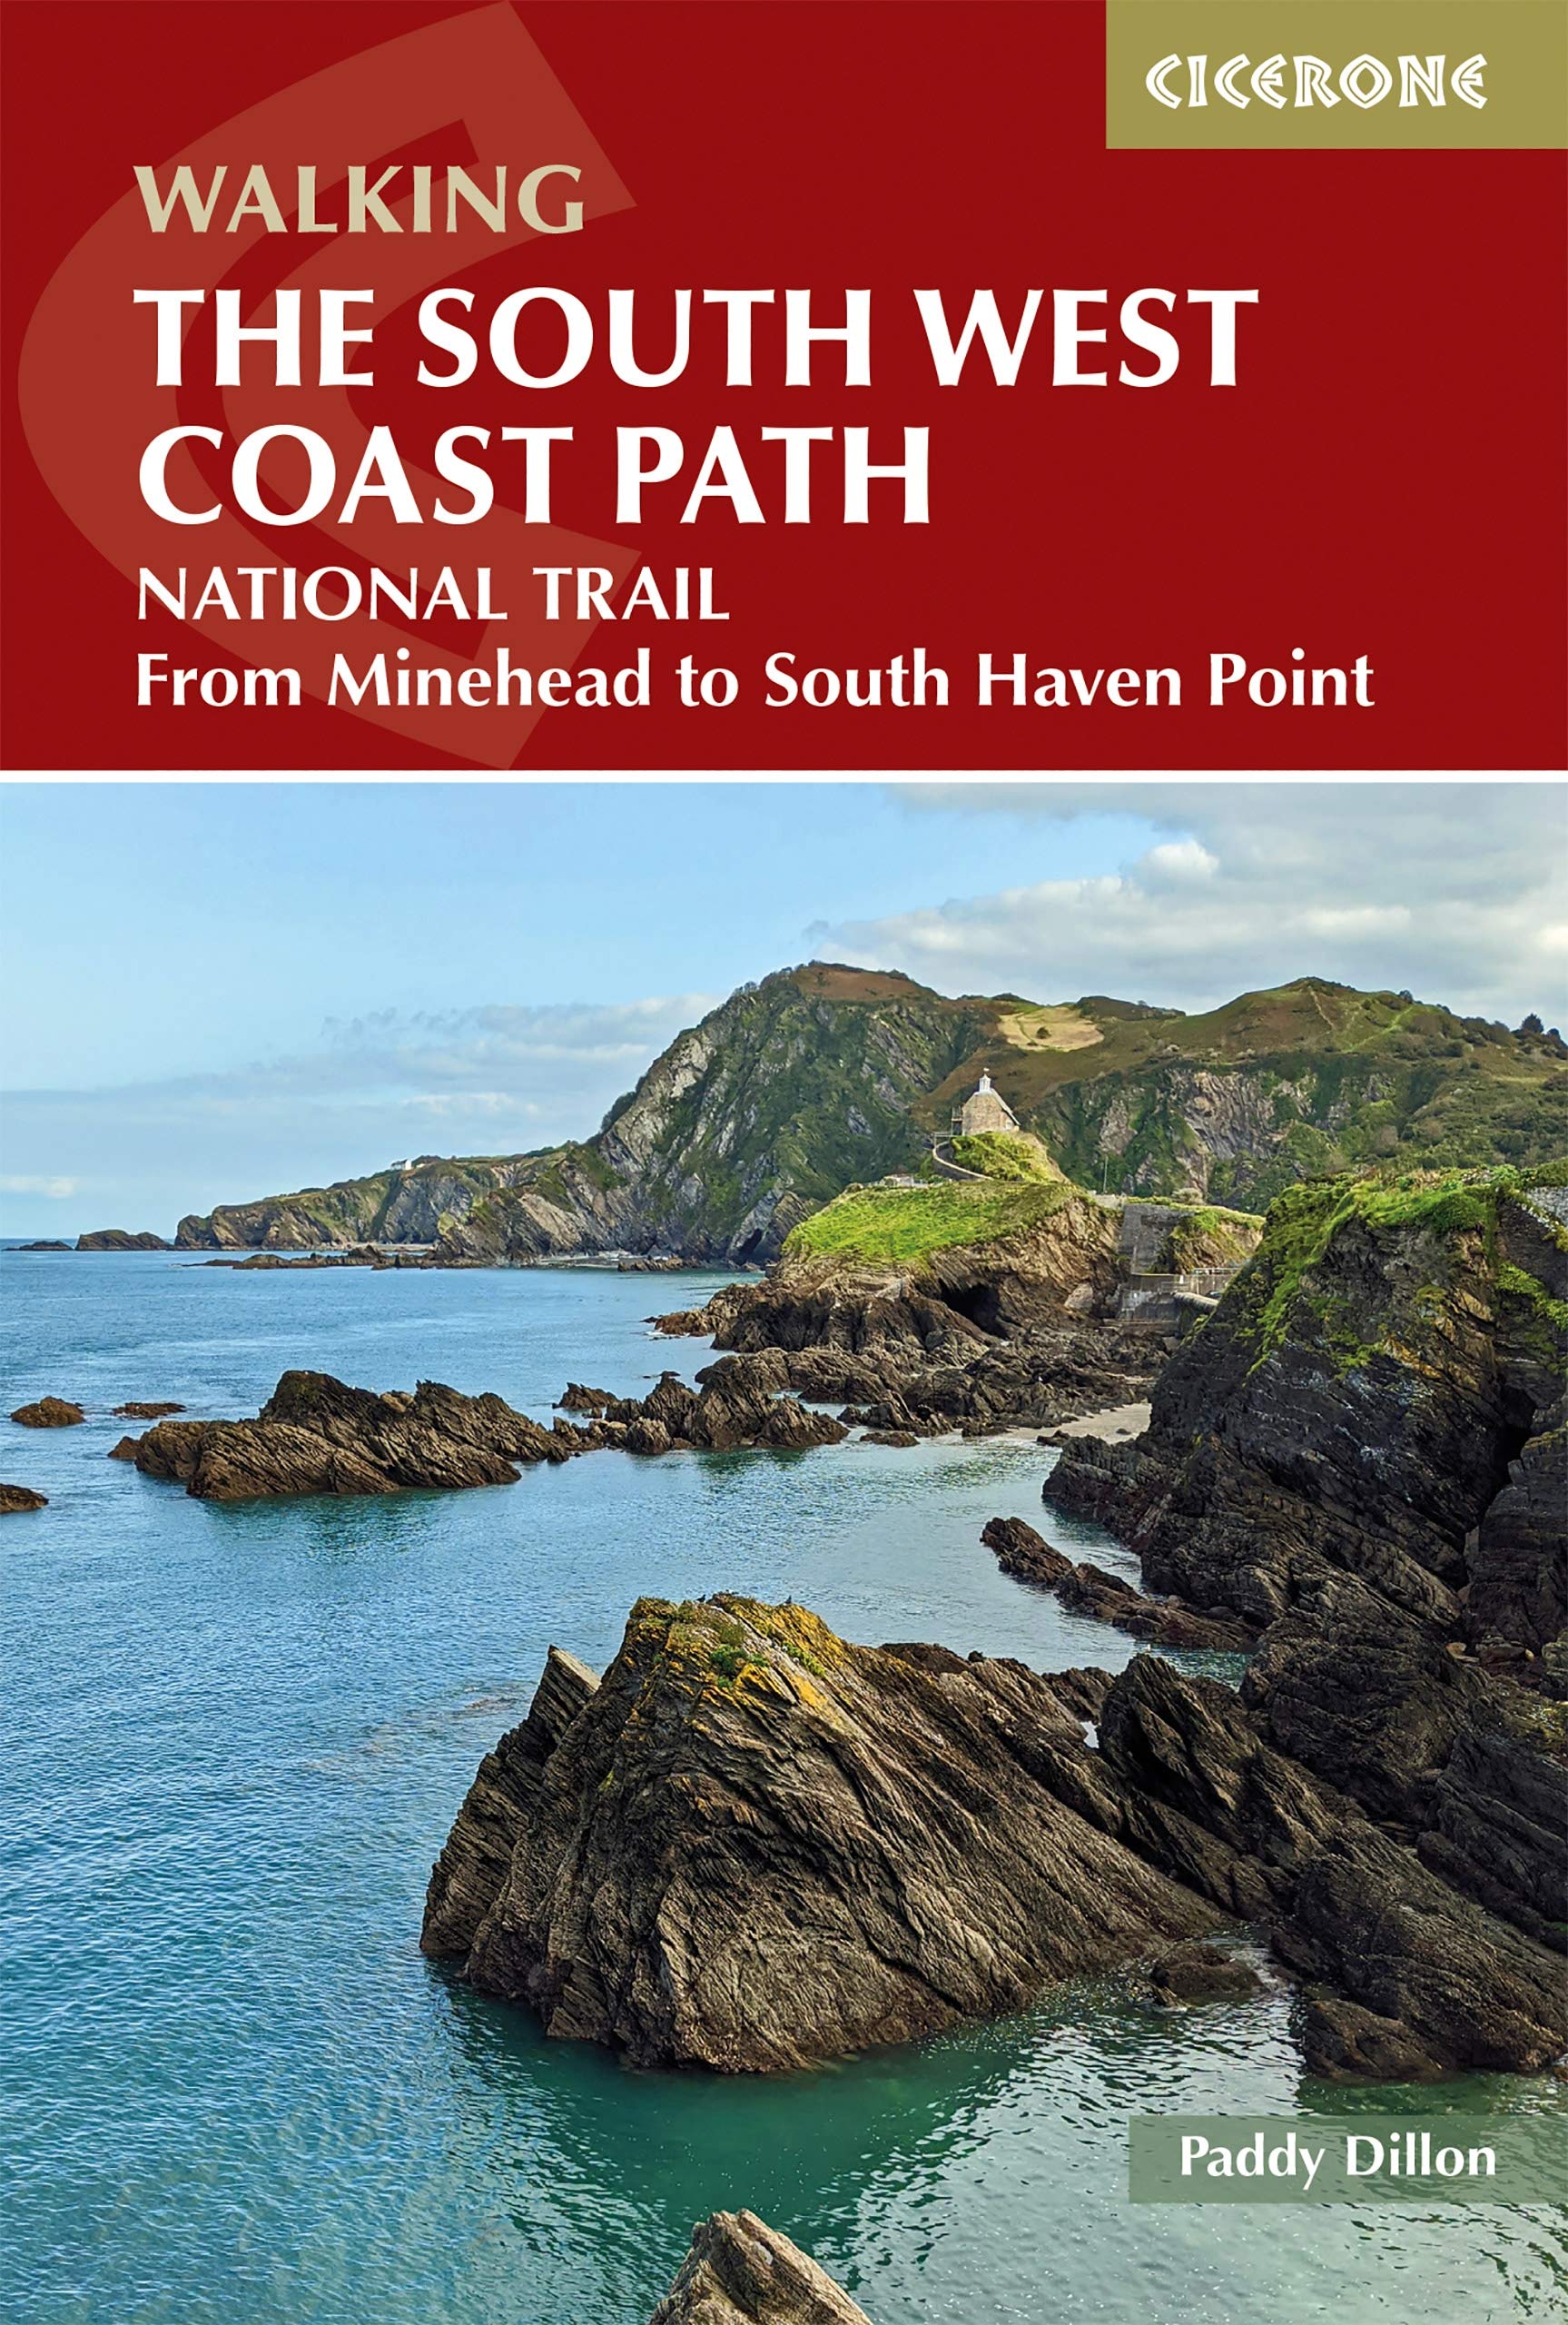 Walking the South West Coast Path: National Trail From Minehead to South Haven Point